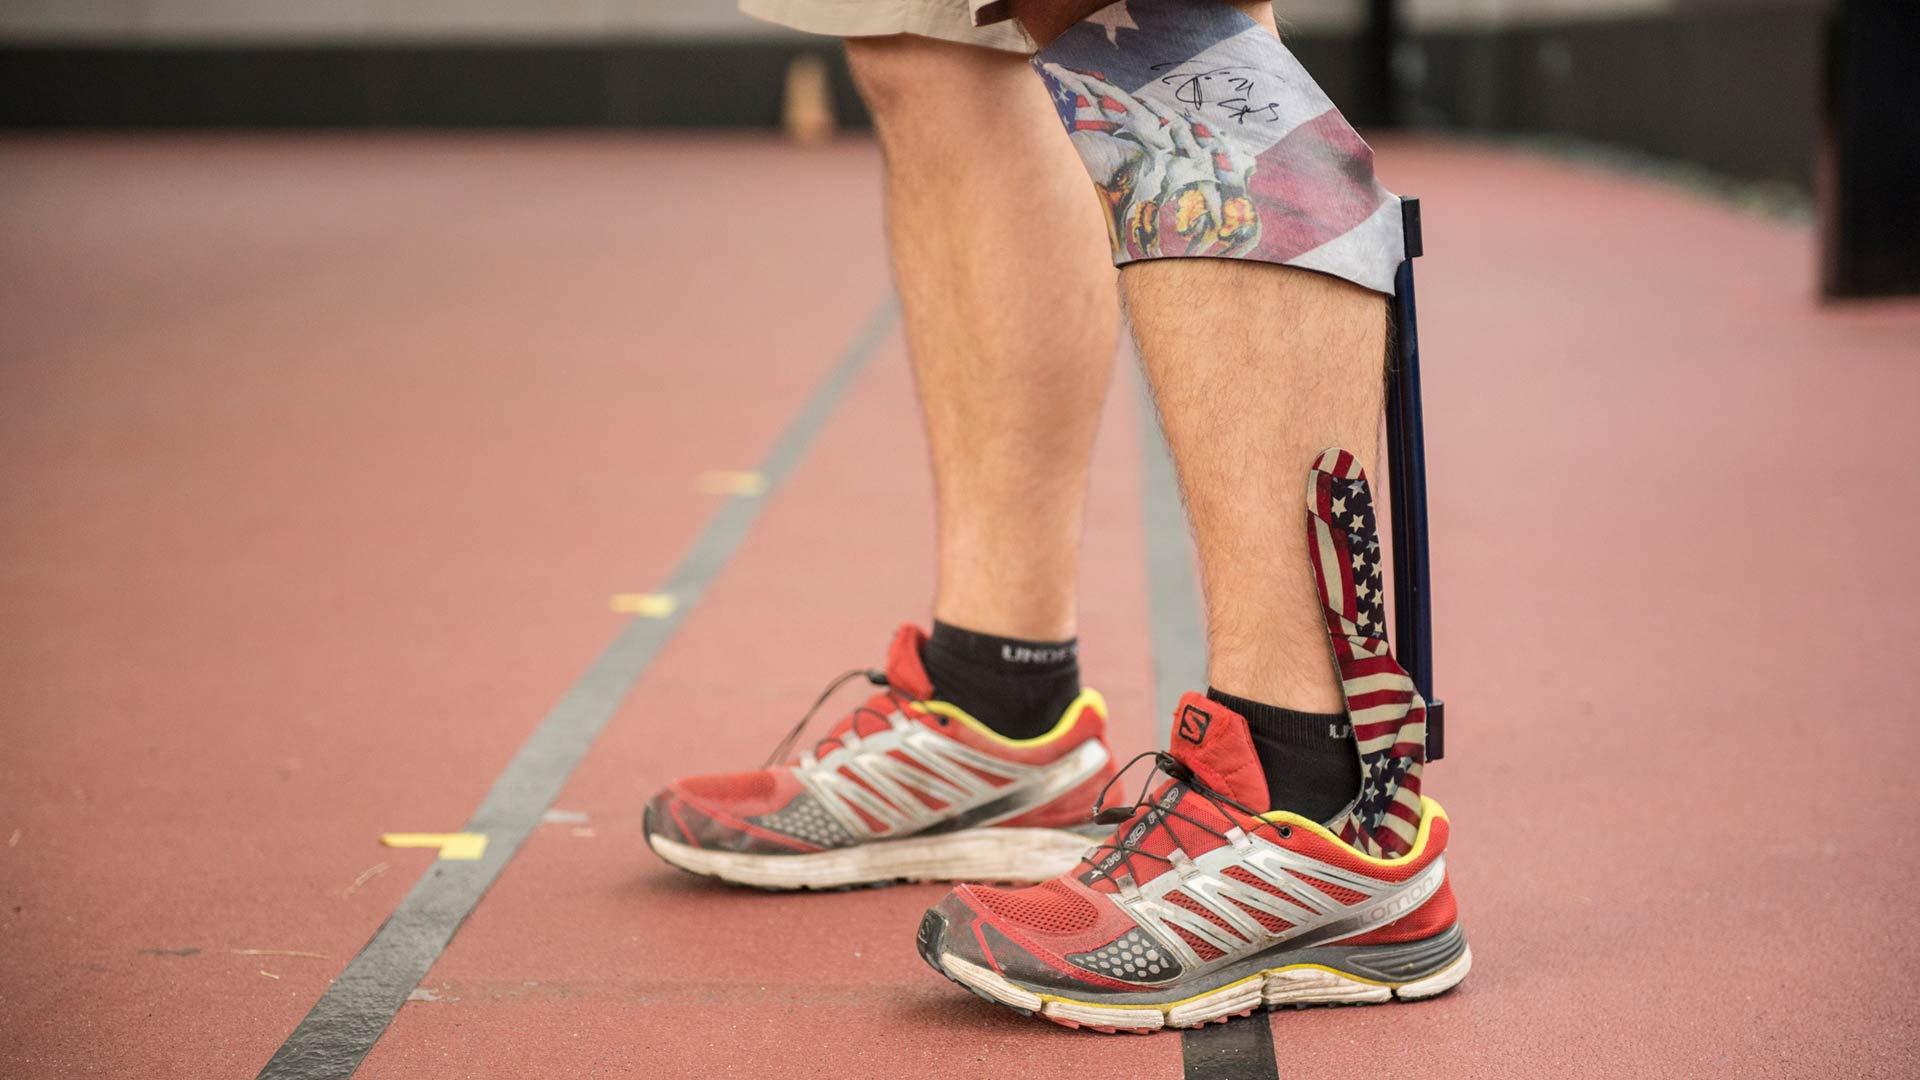 The University of Arizona received a grant from the U.S. Department of Defense to study ways to help injured veterans recover from broken bones.